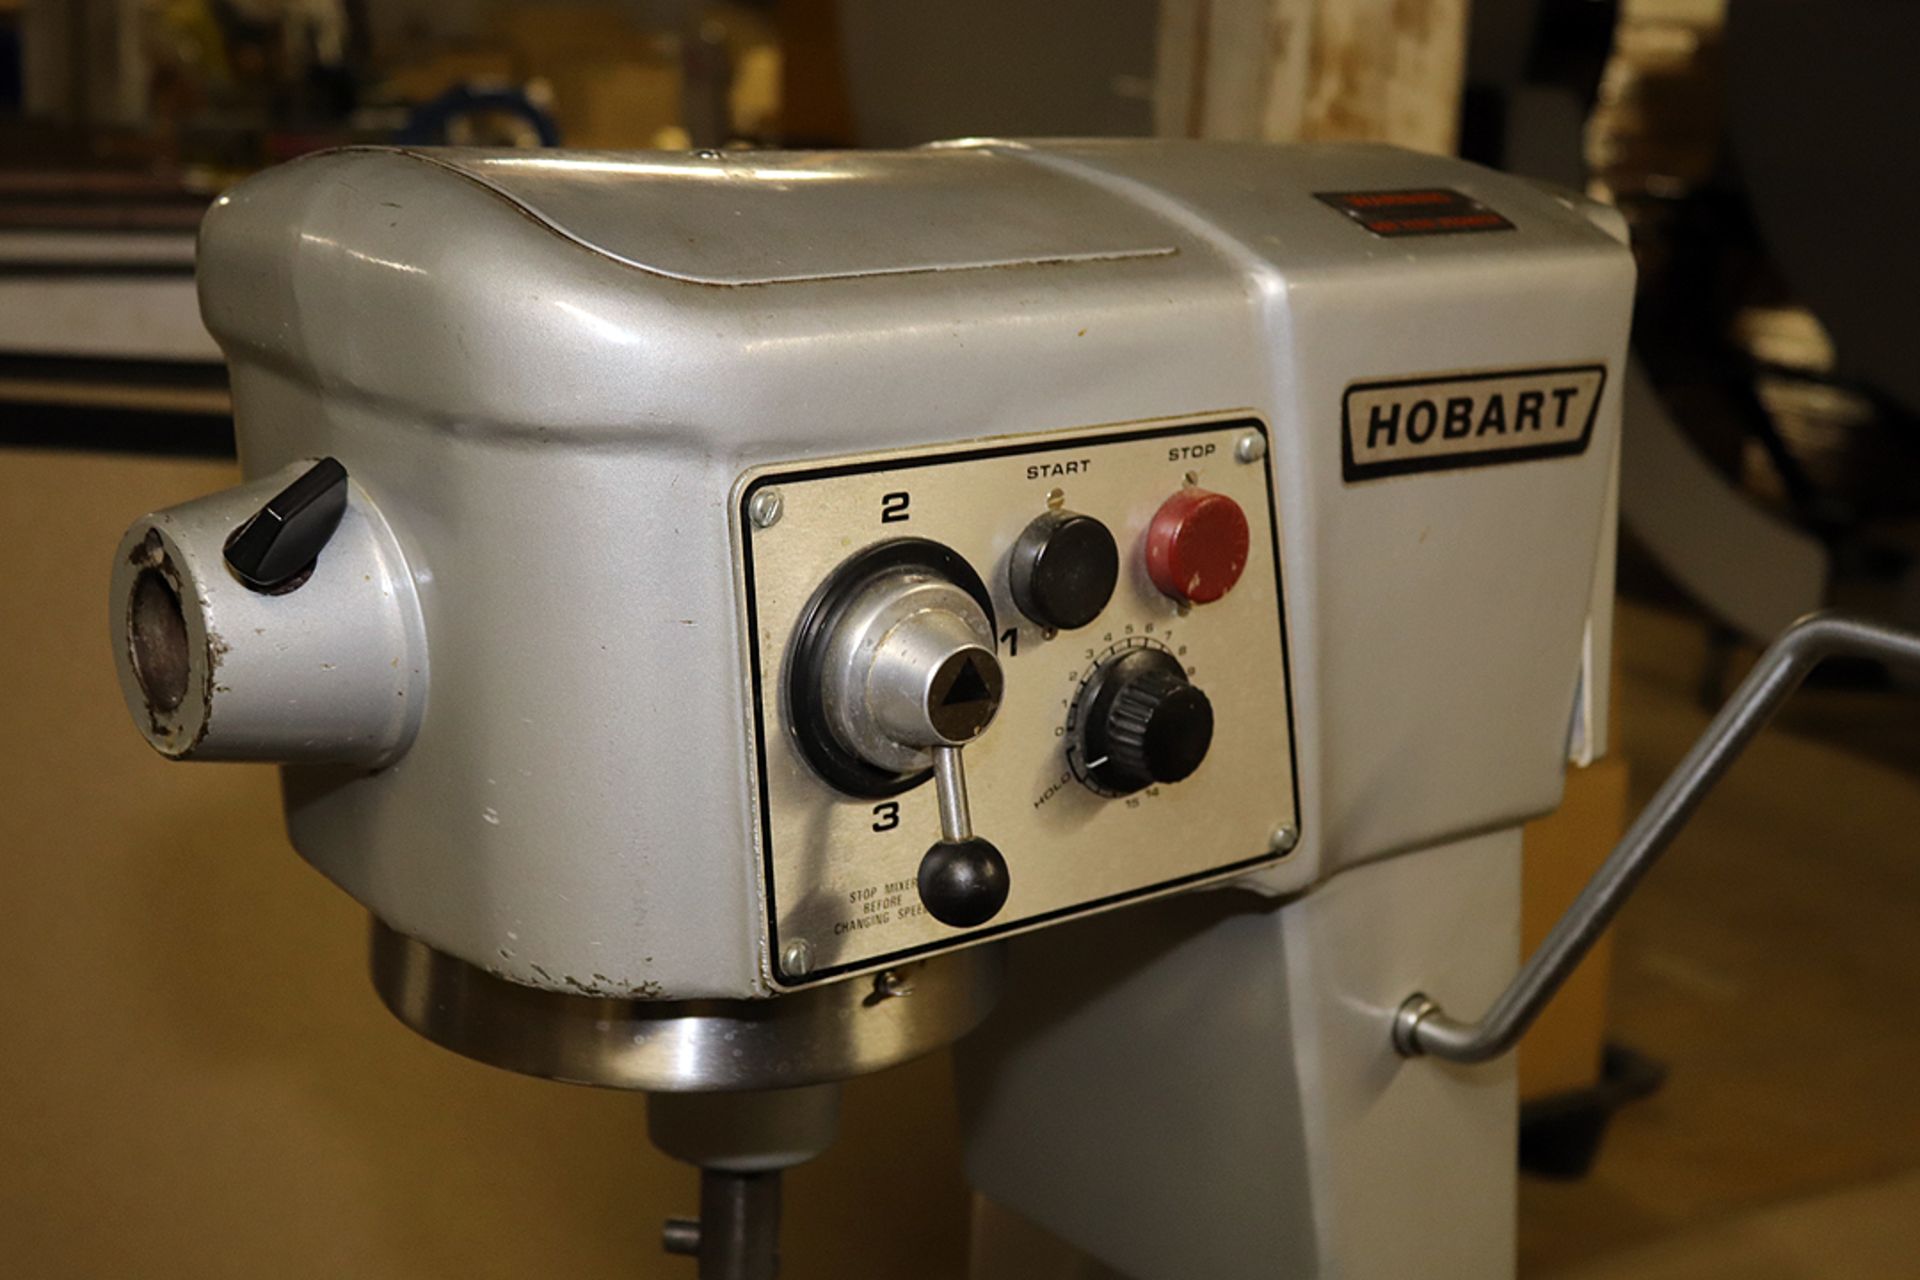 Hobart Commercial Mixer Model D300T with bowl and attachments - Image 2 of 4